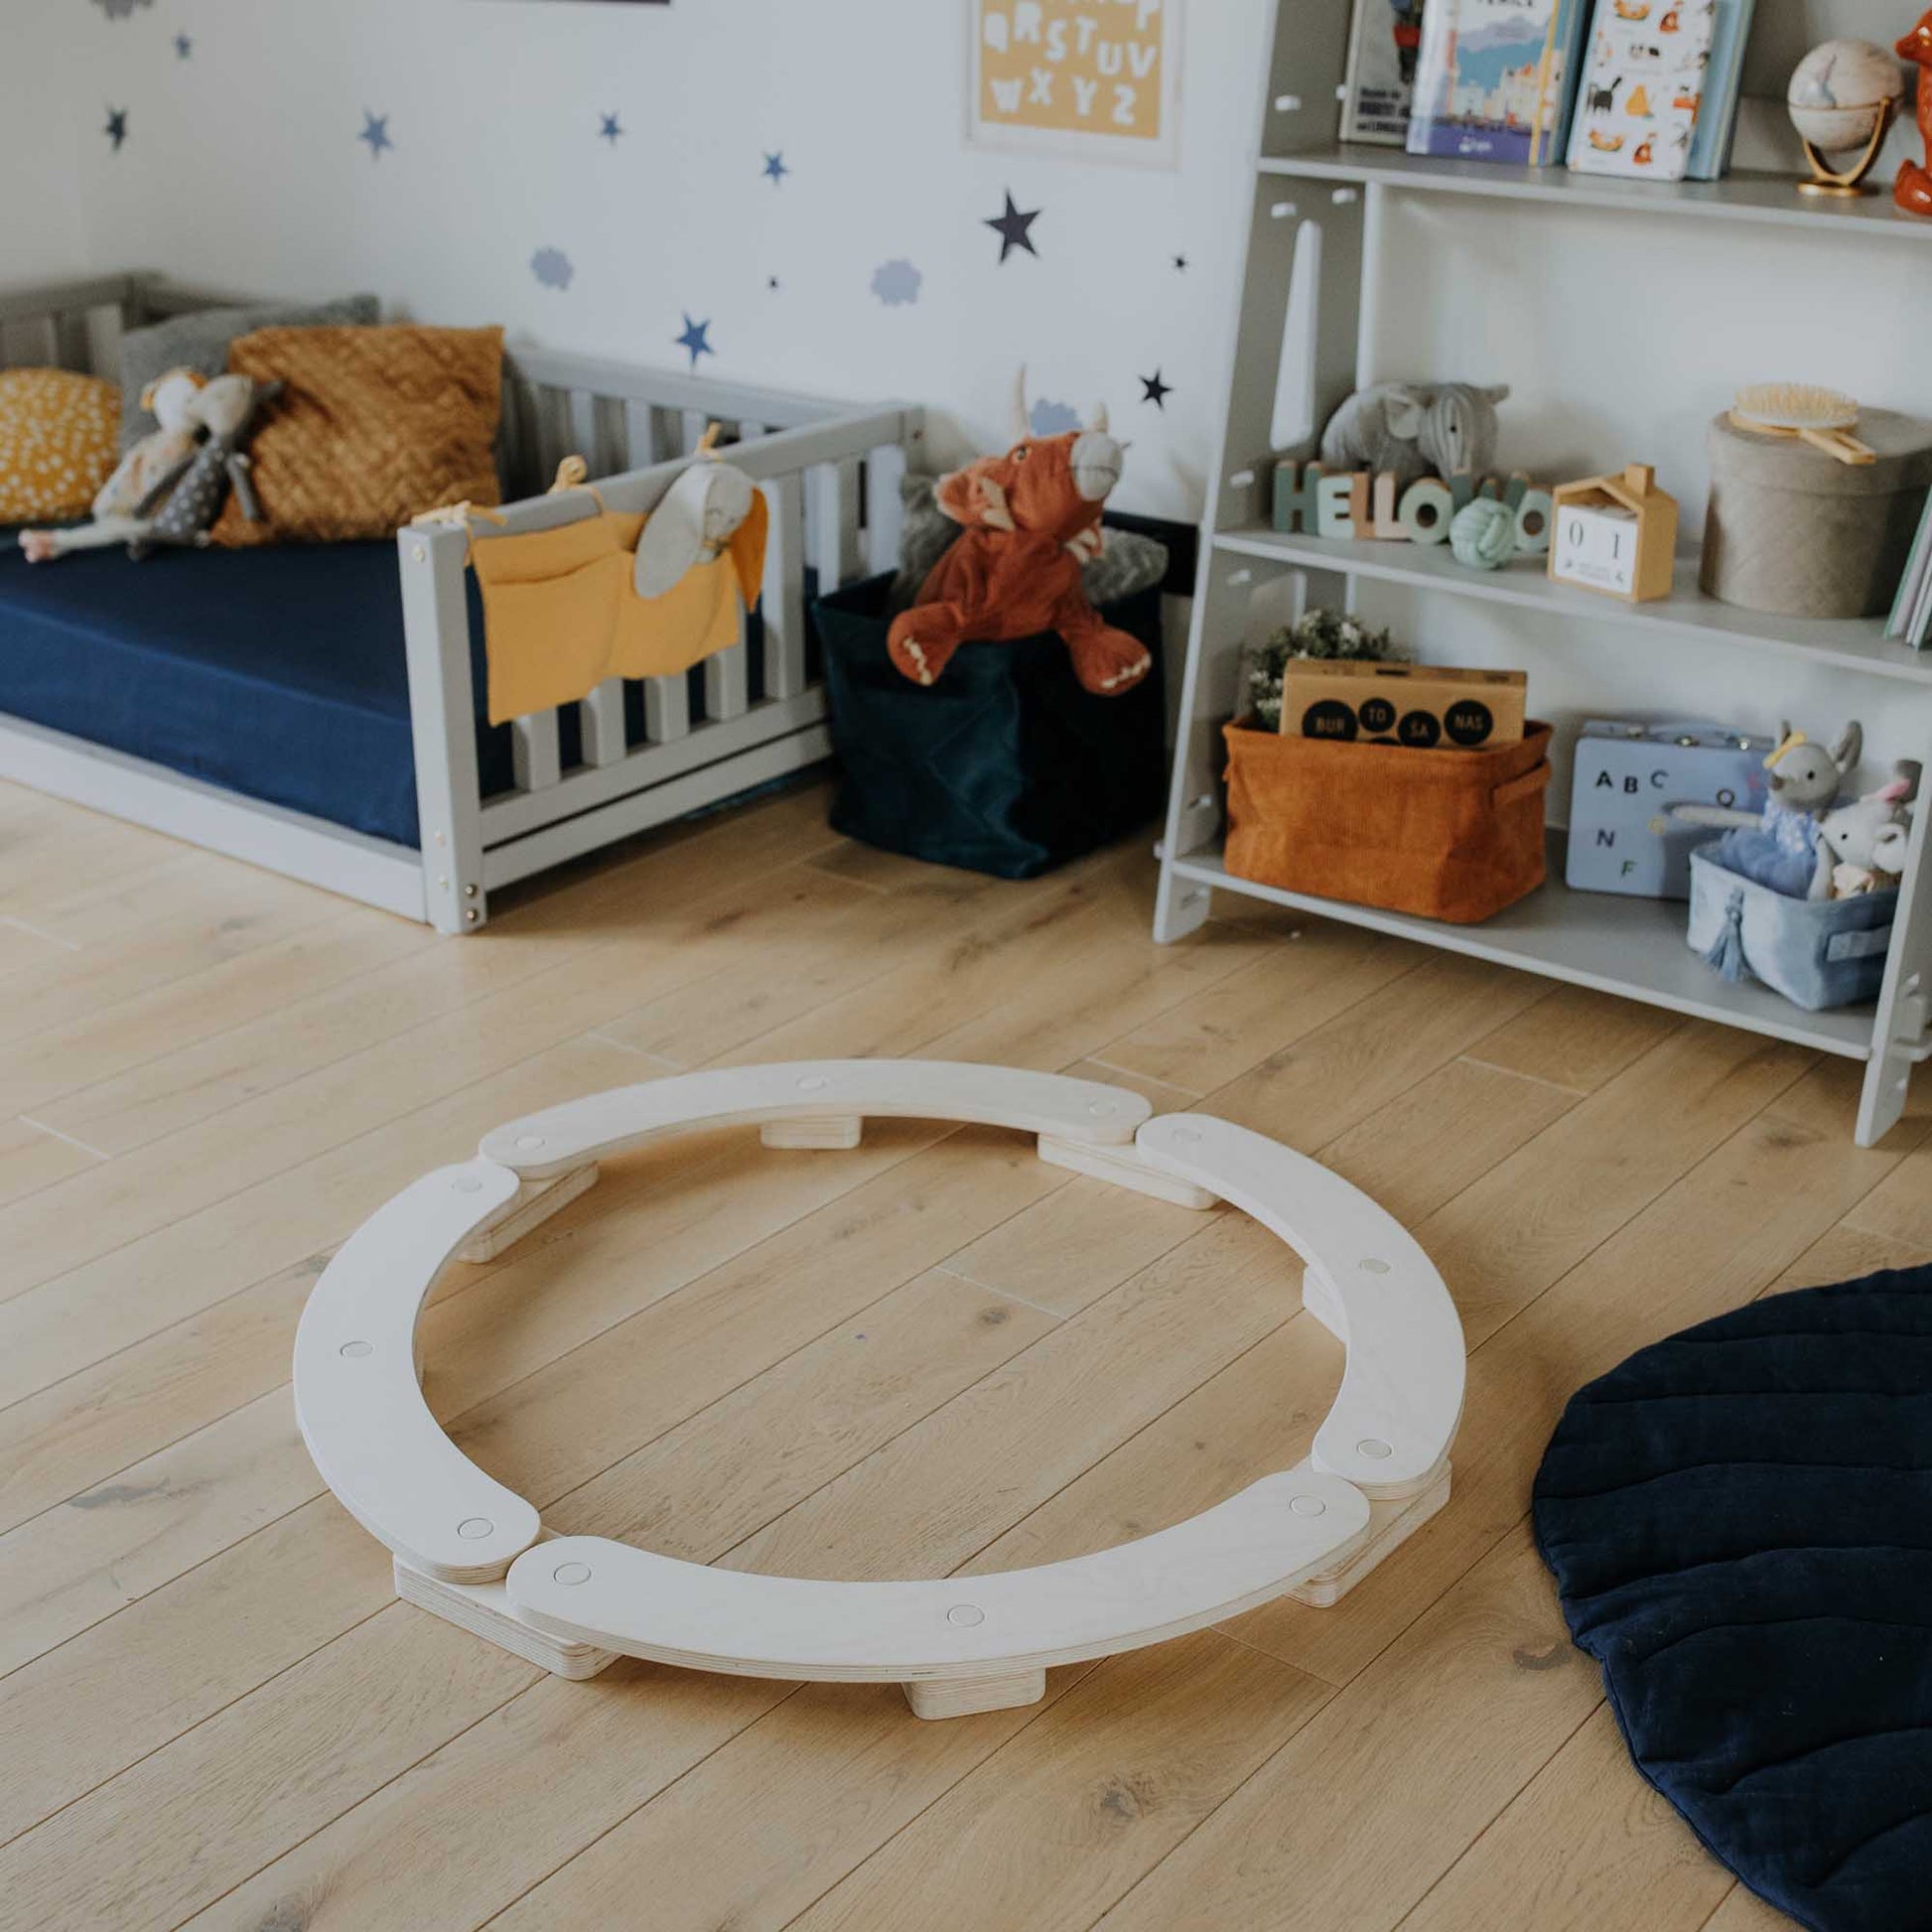 A Montessori toy set up in a child's room with Round balance beams and a circle play mat.